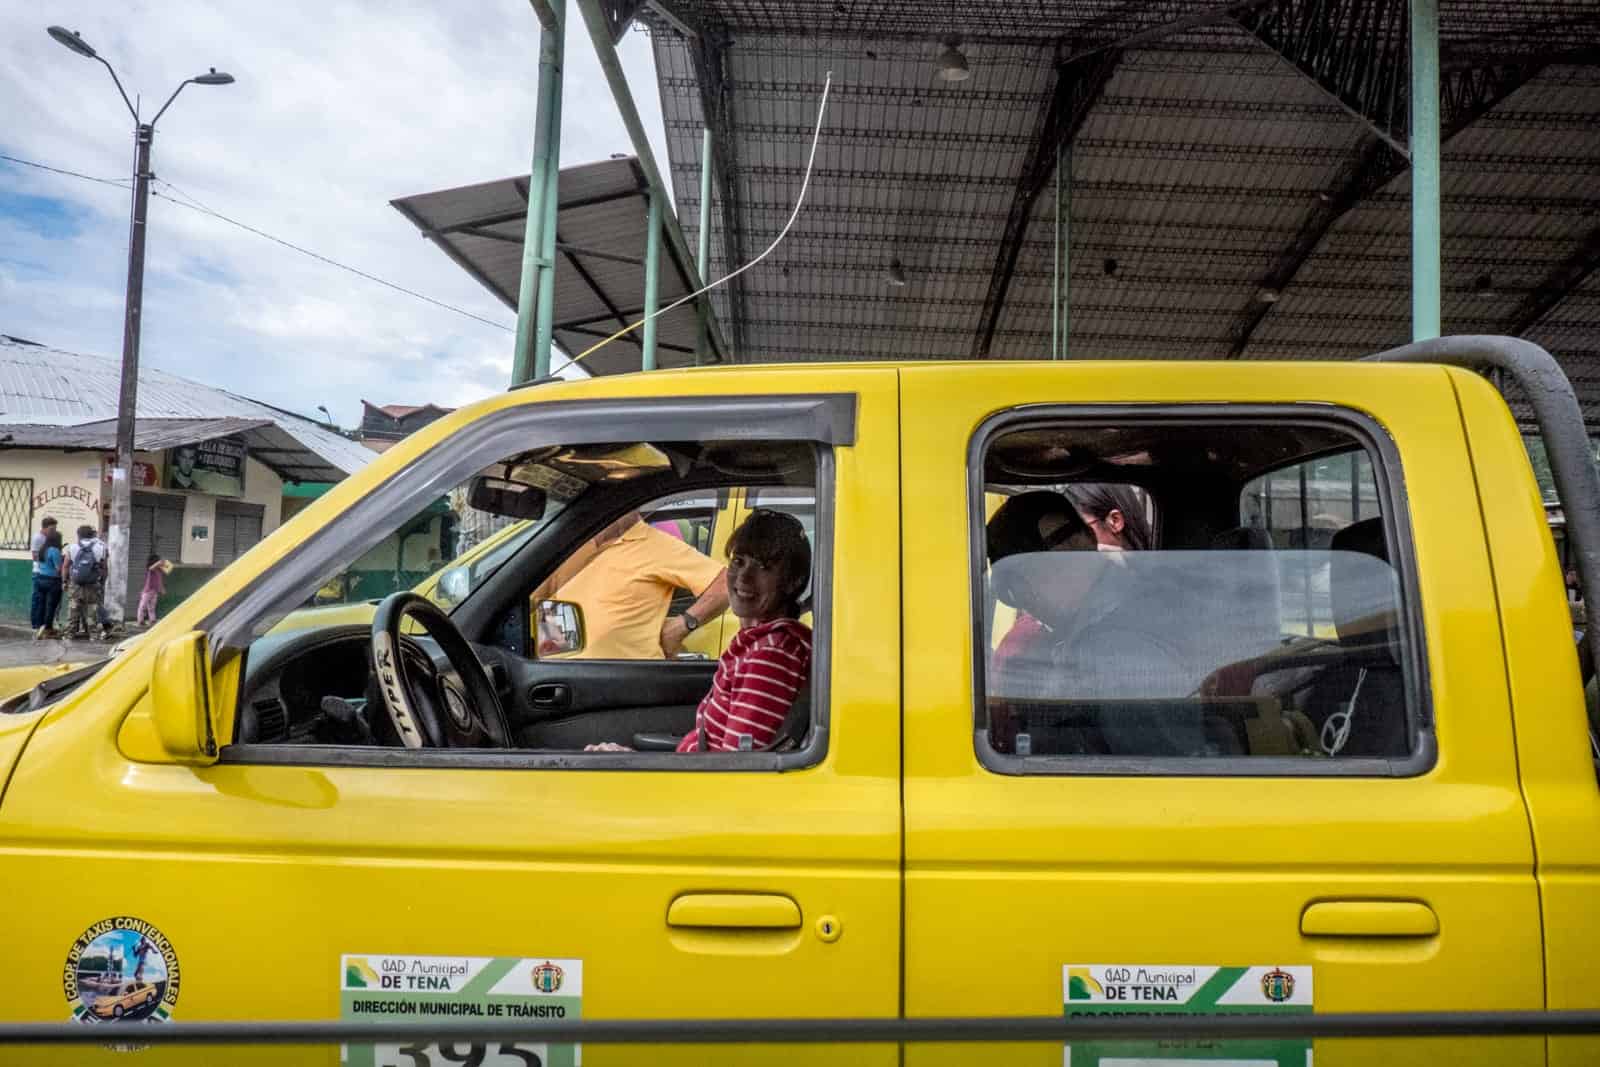 A woman smile in the passenger seat of a yellow Taxi in Tena, Ecuador. Other passenger can be seen squeezed into the back seat. 